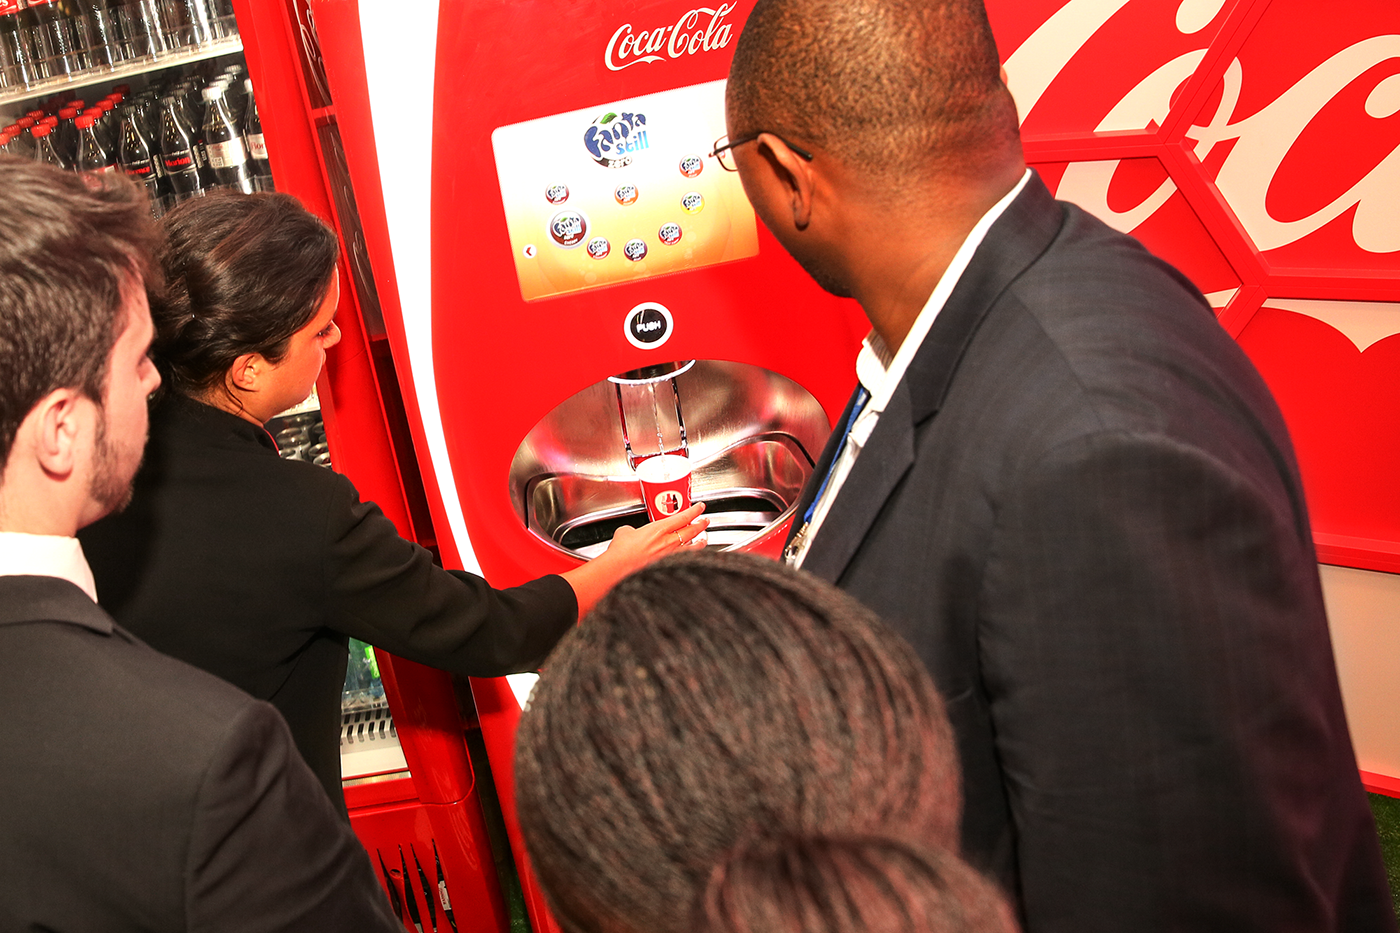 Coca-Cola summit booth world cup Event